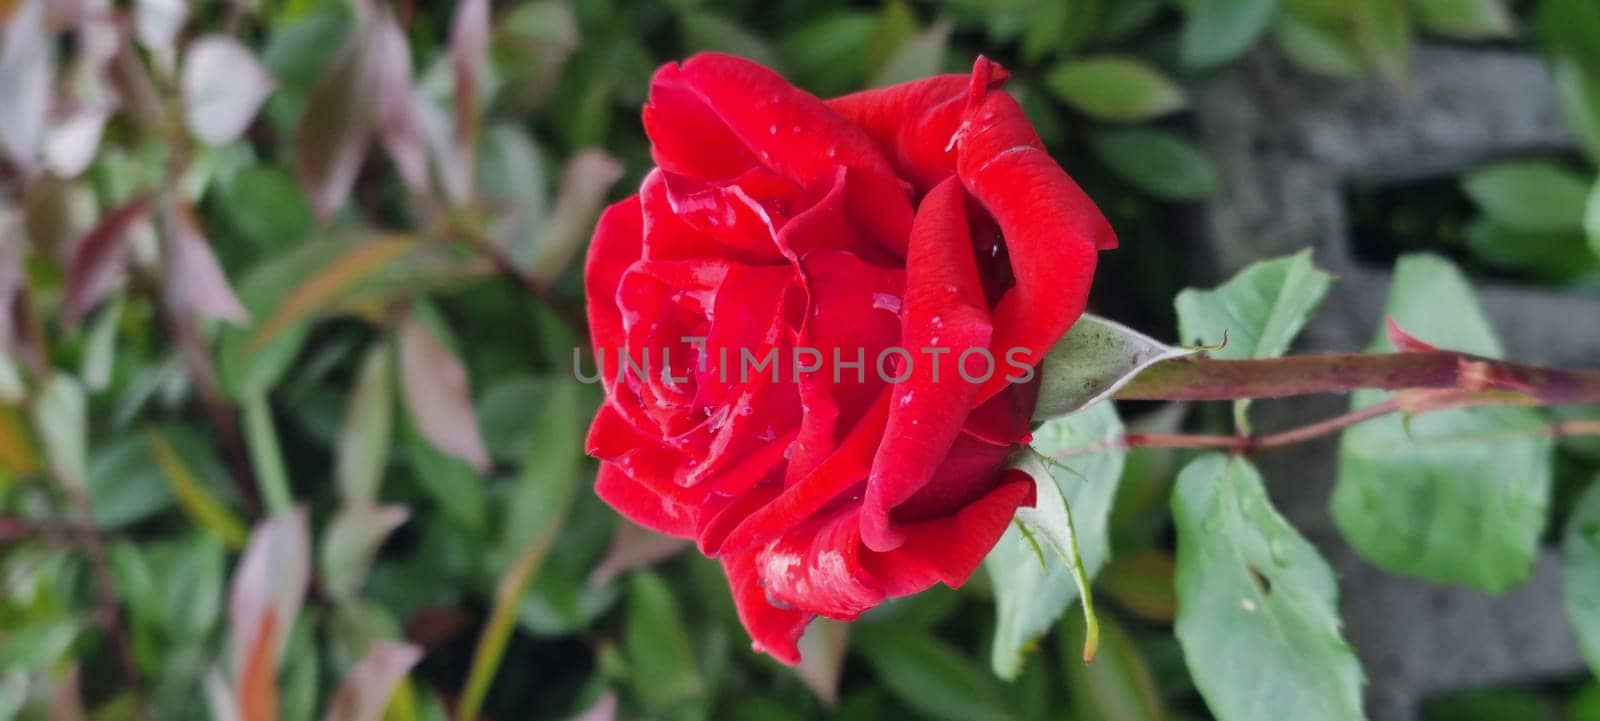 Close-up of a dew-kissed red rose against a natural backdrop, showcasing its delicate petals